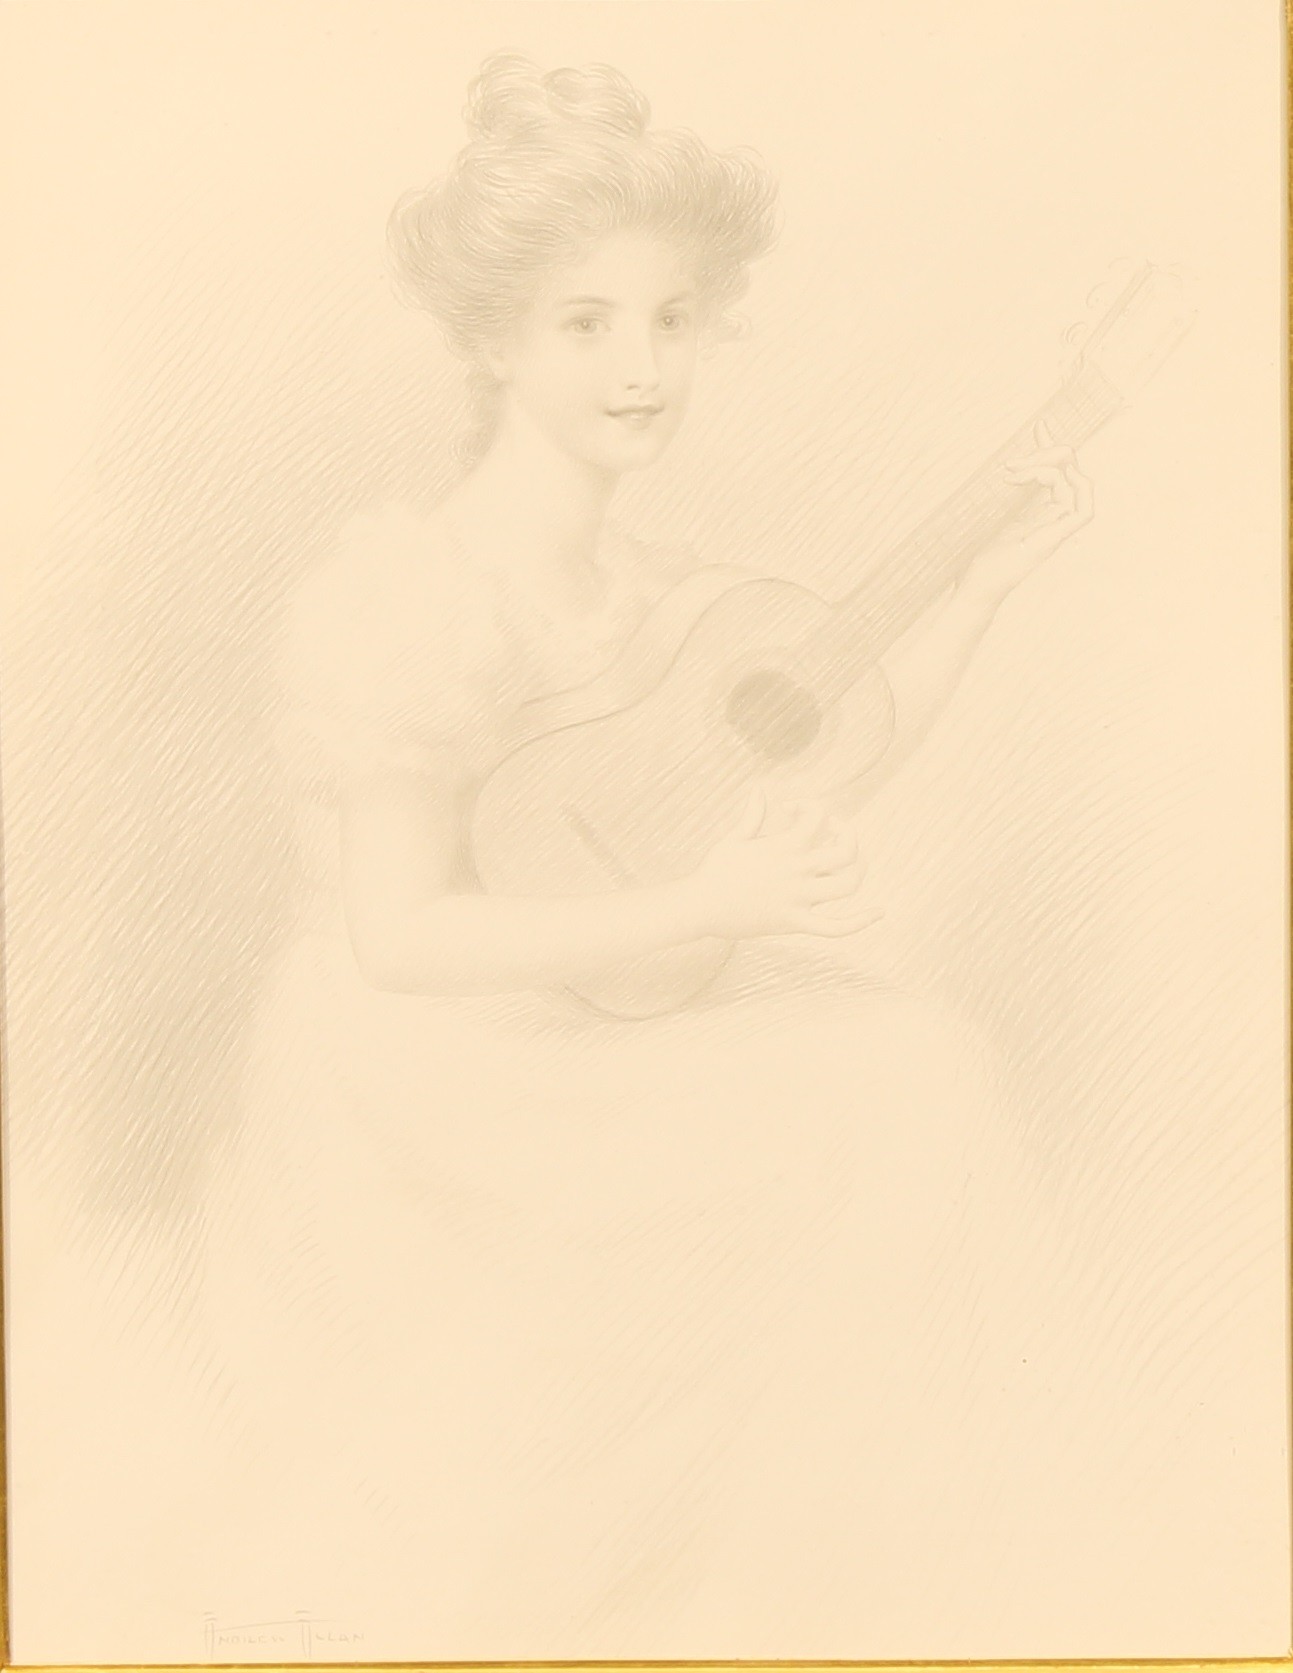 Andrew Allan (1863 - 1942) The Parlour Guitar signed, silverpoint drawing, 33cm x 25cm